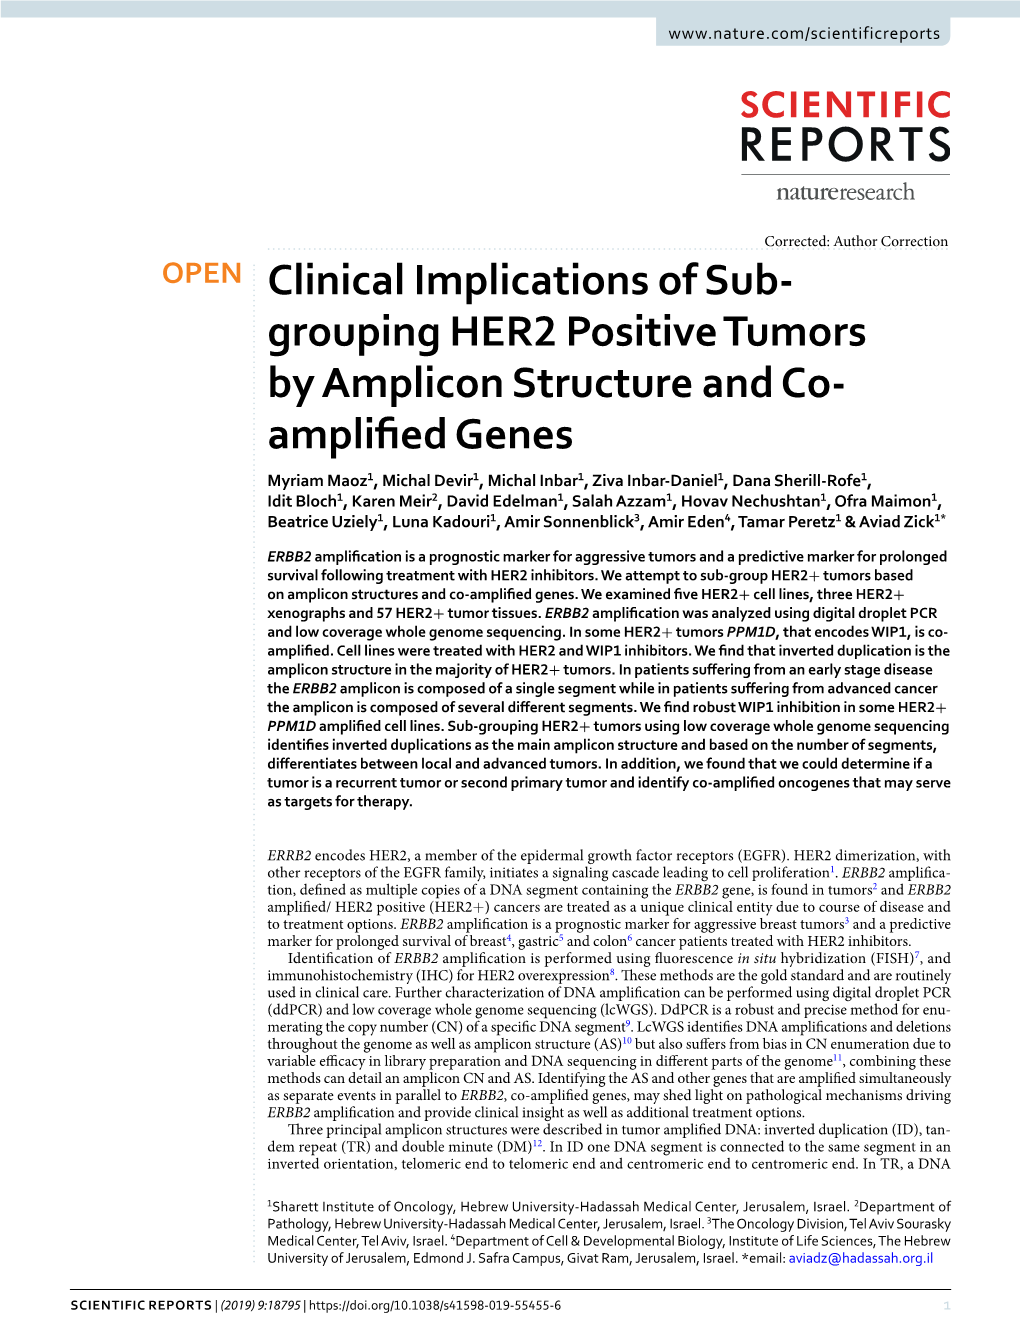 Clinical Implications of Sub-Grouping HER2 Positive Tumors by Amplicon